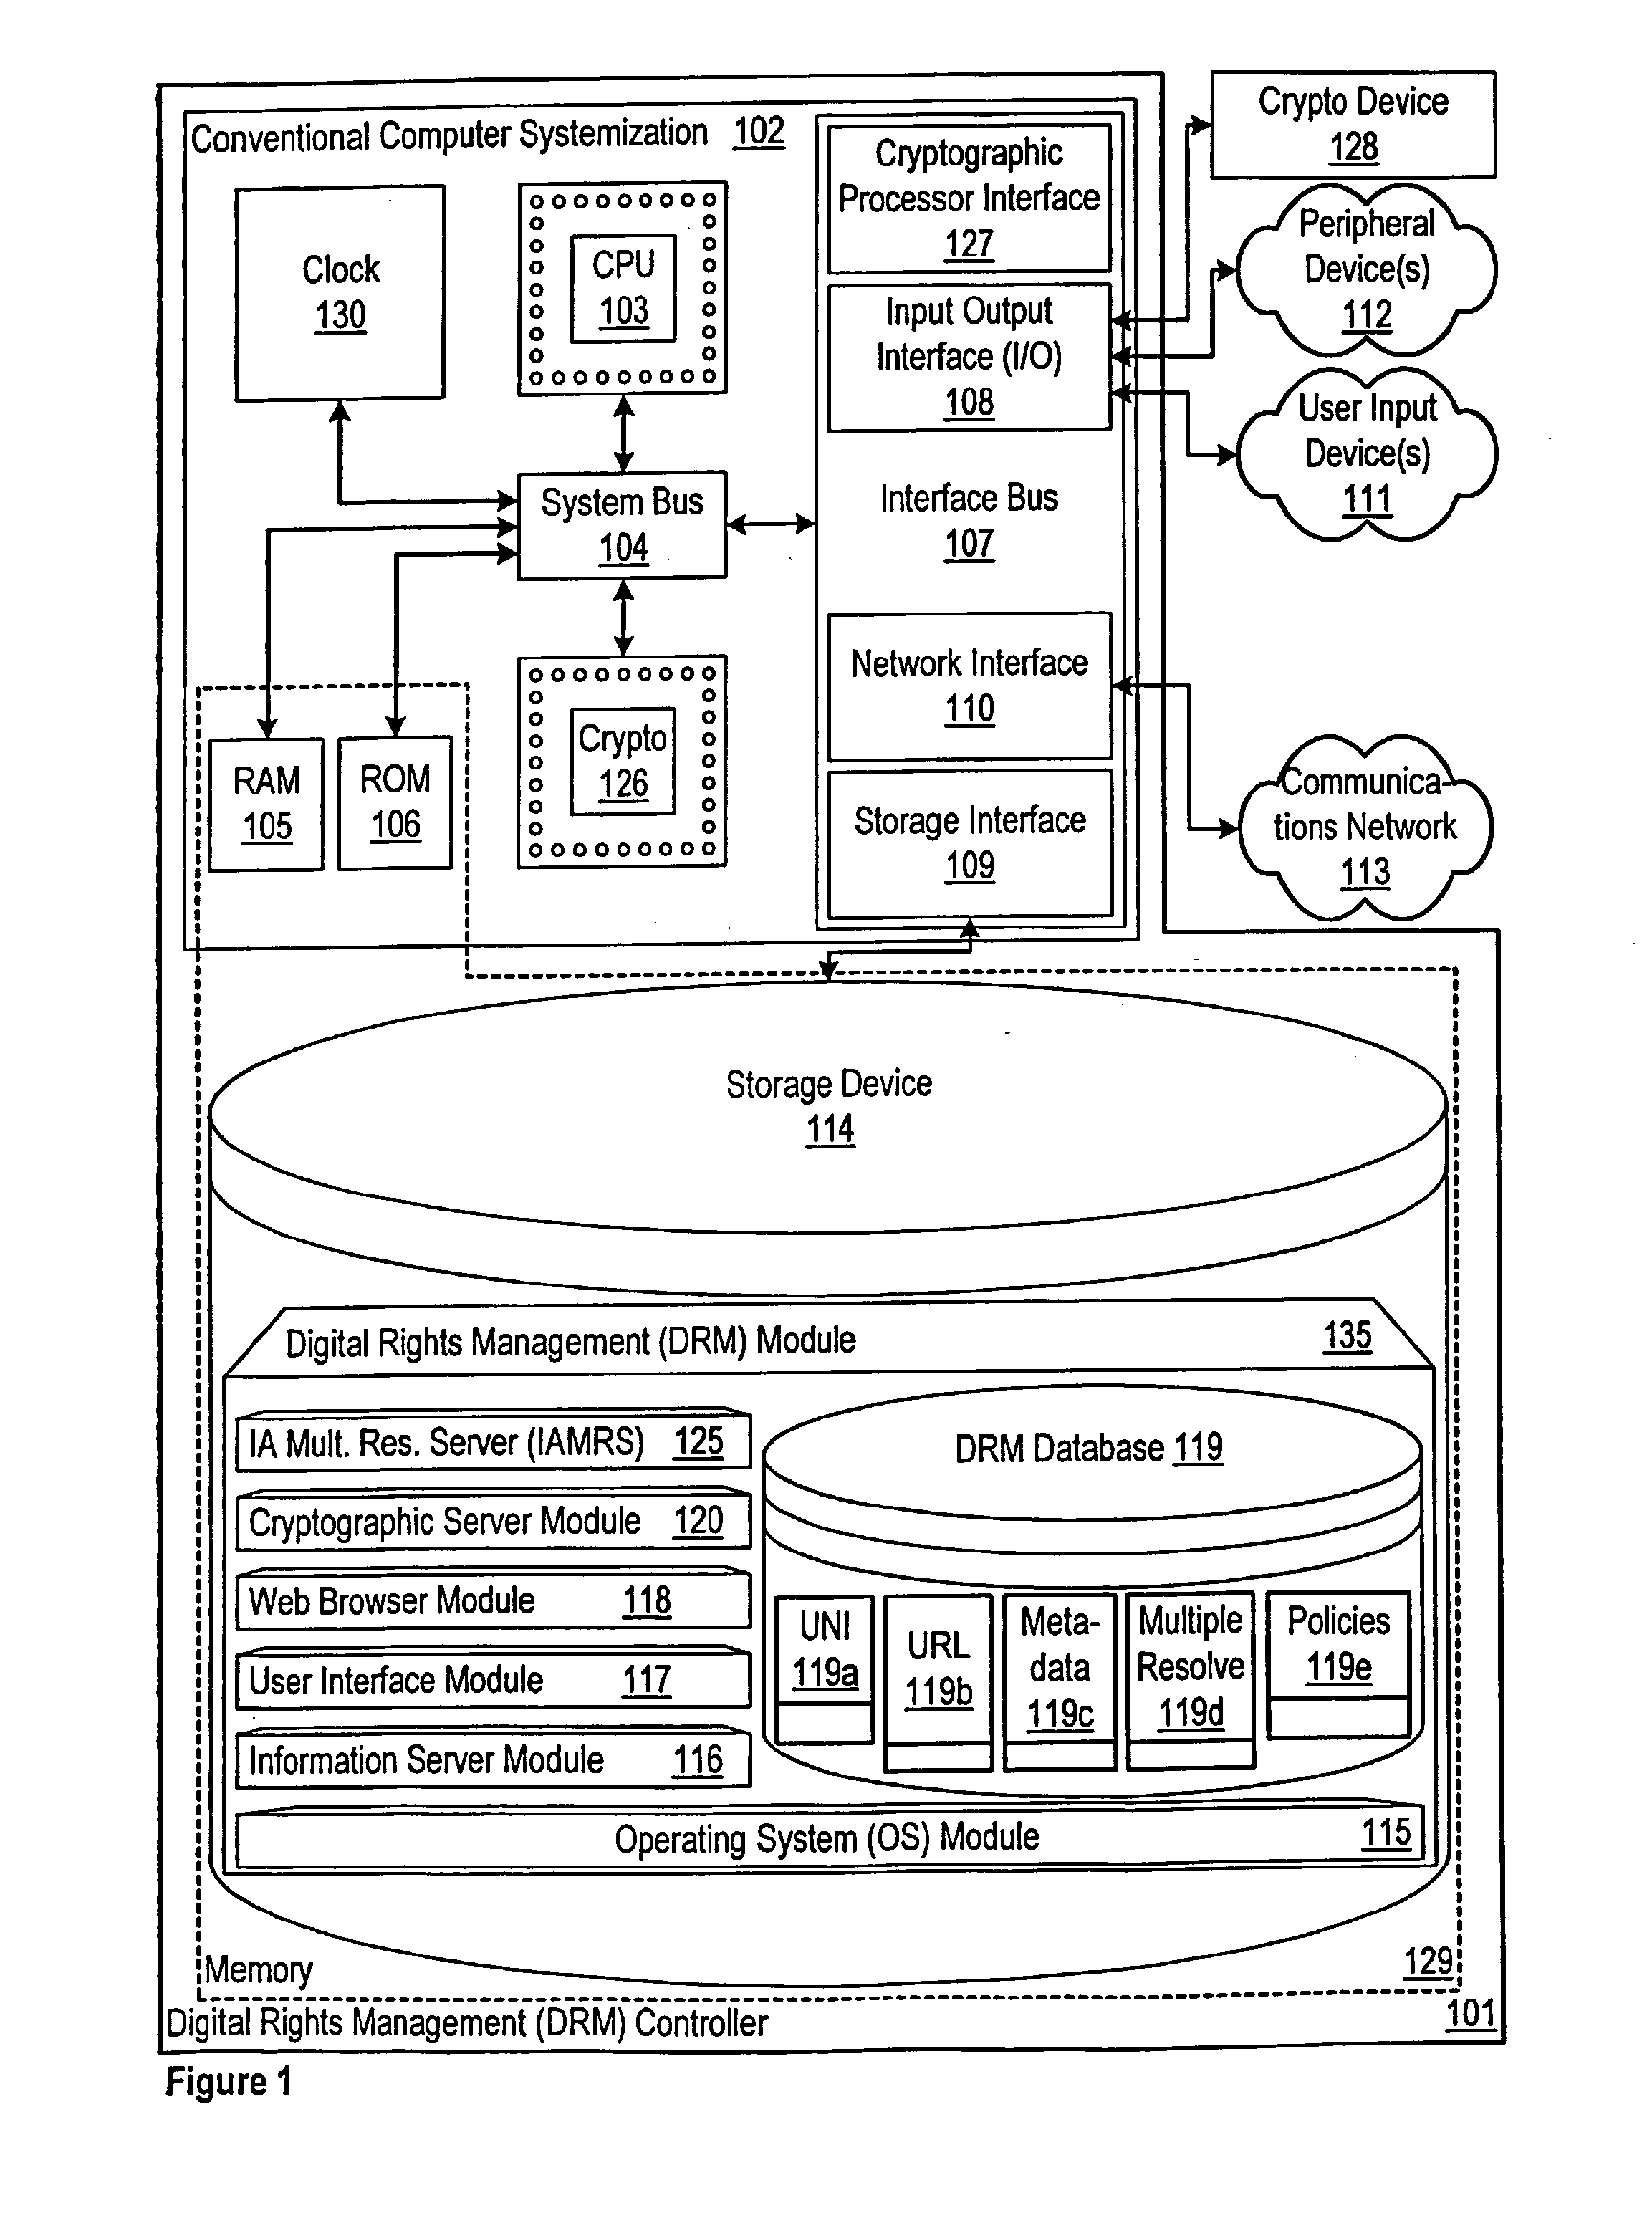 Apparatus, Method and System for Accessing Digital Rights Management Information